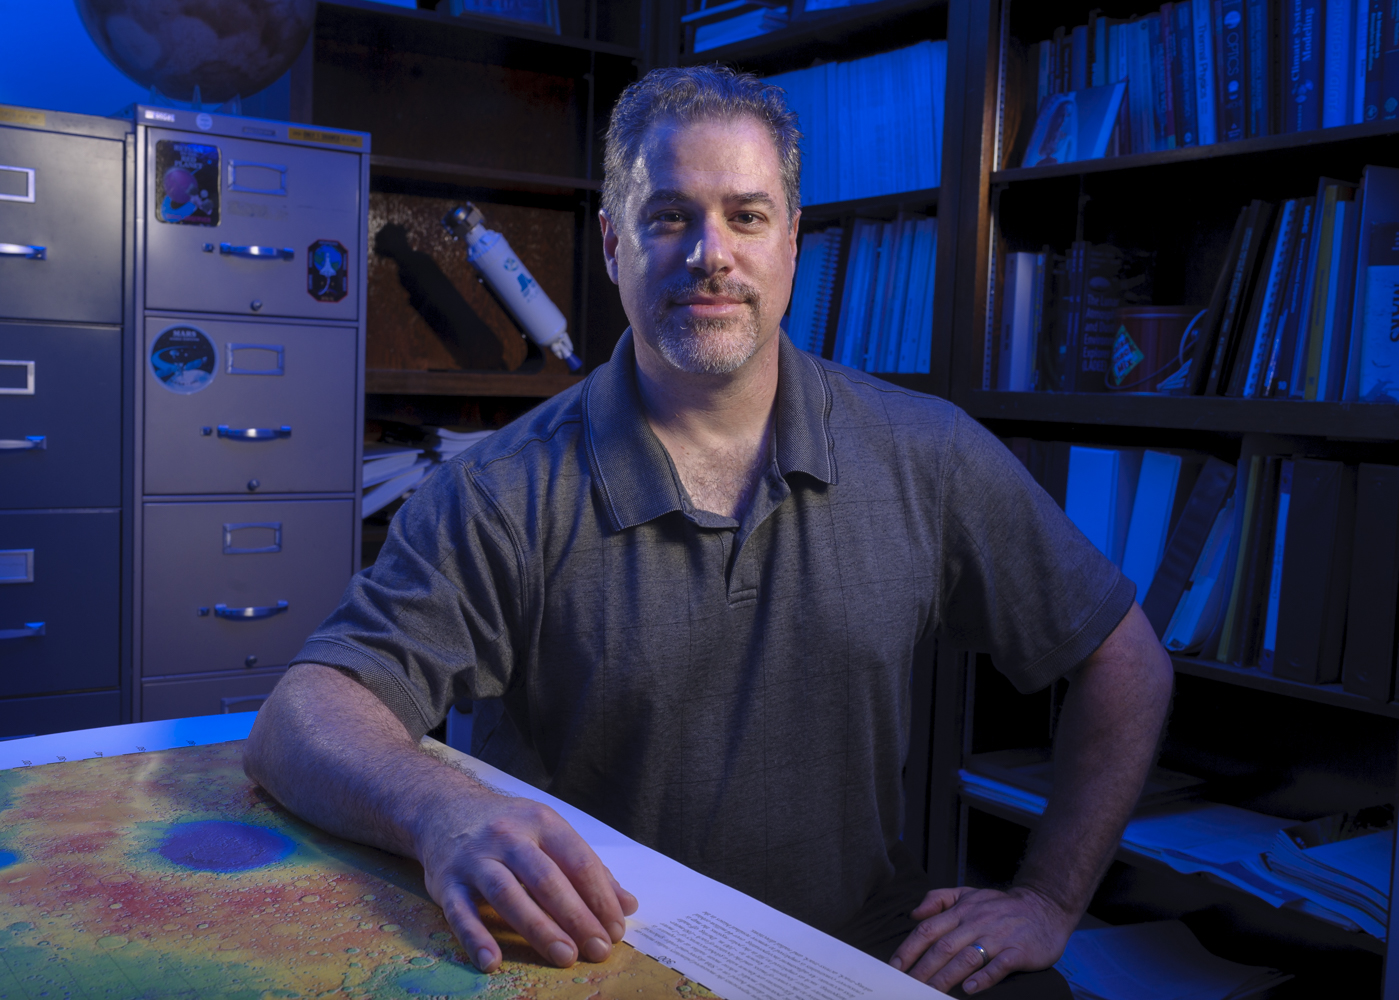 NASA scientist Tony Colaprete in his office with a model of the LCROSS spacecraft behind him.